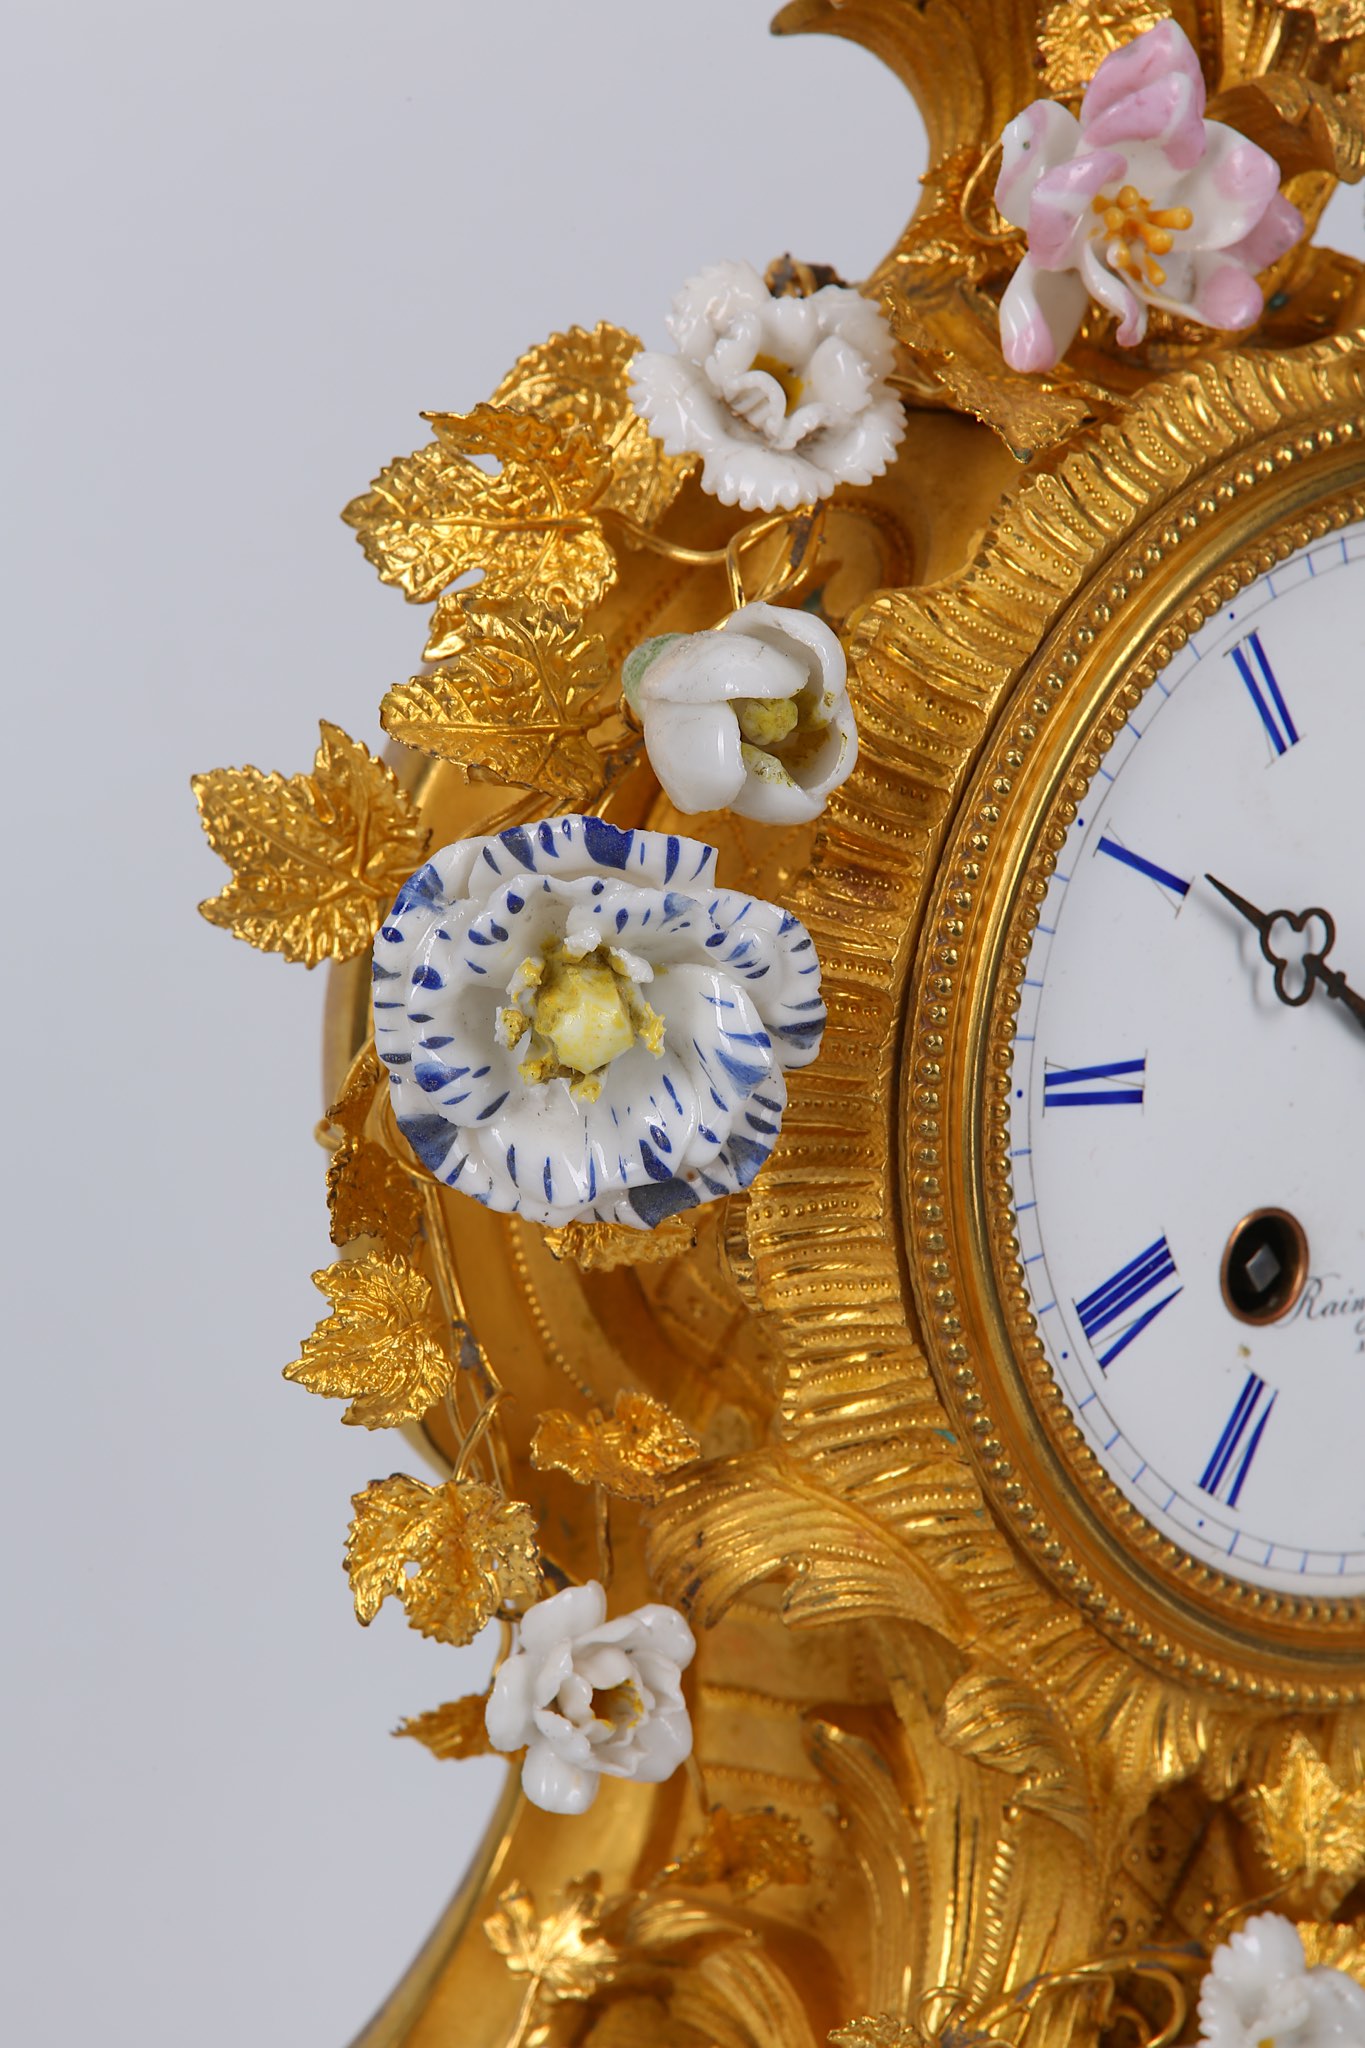 A MID 19TH CENTURY FRENCH GILT BRONZE AND PORCELAIN MOUNTED MANTEL CLOCK BY RAINGO FRERES, PARIS the - Image 7 of 9